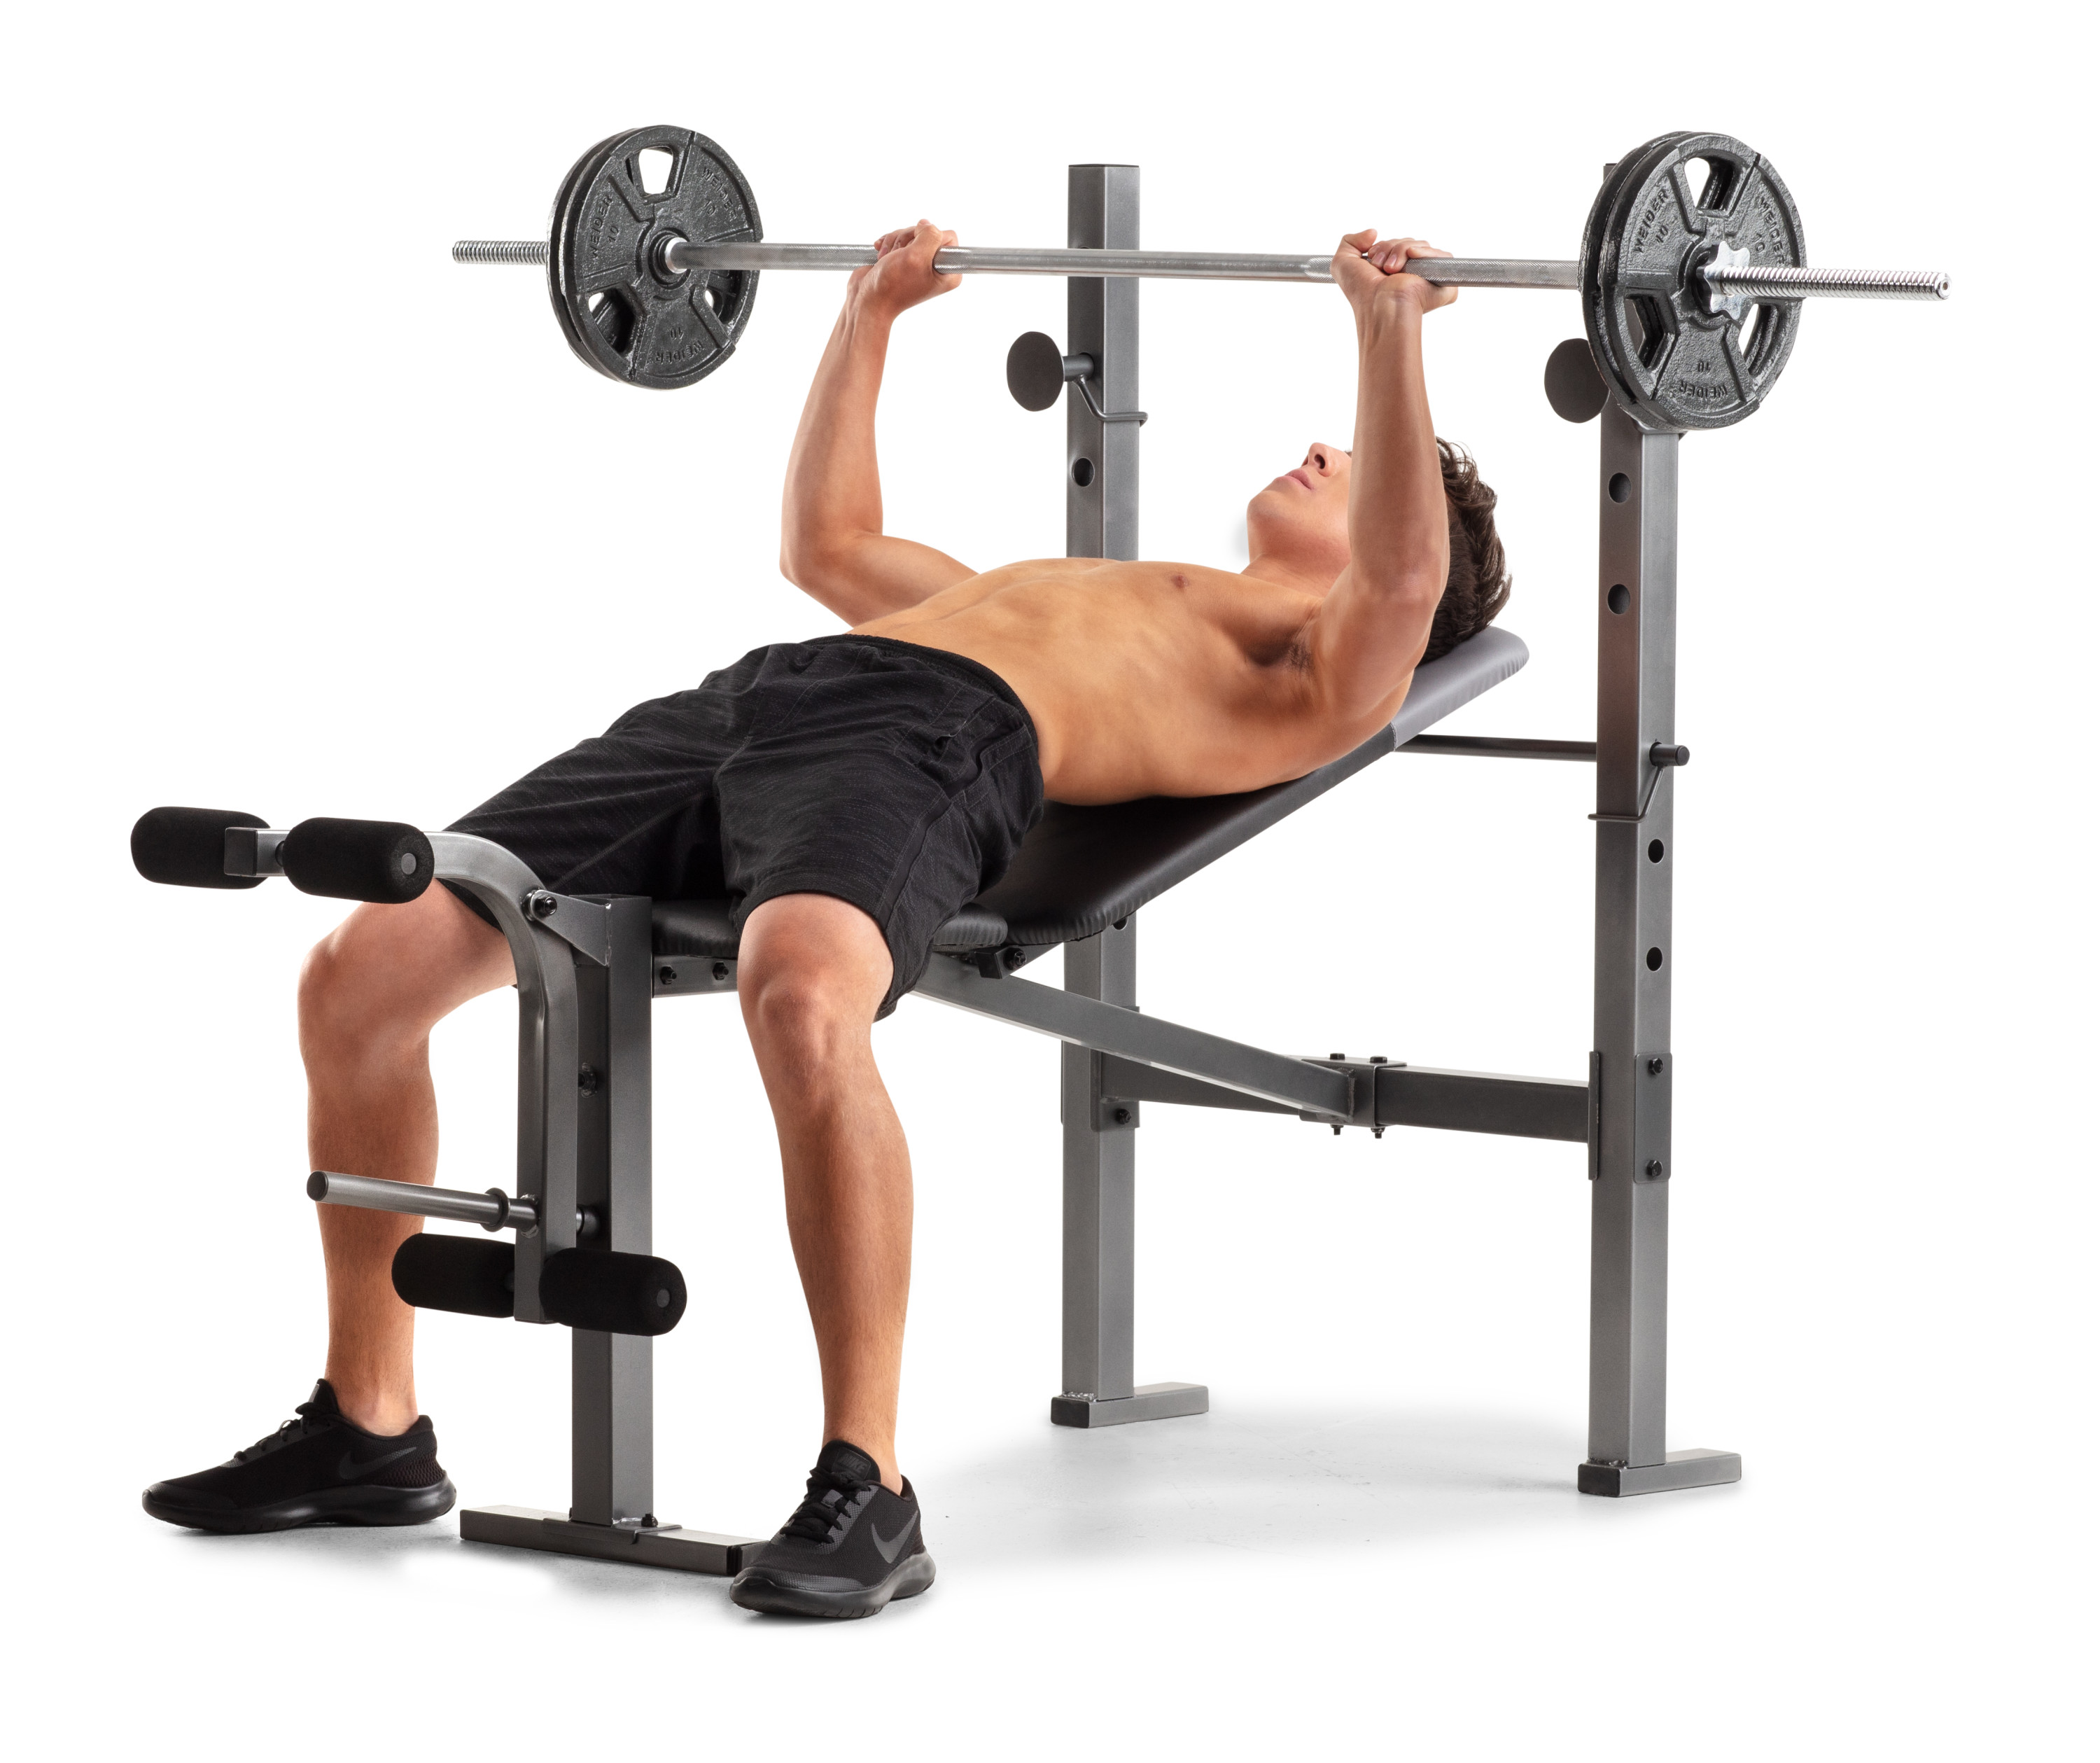 Weider XR 6.1 Adjustable Weight Bench with Leg Developer, 410 lb. Weight Limit - image 10 of 12